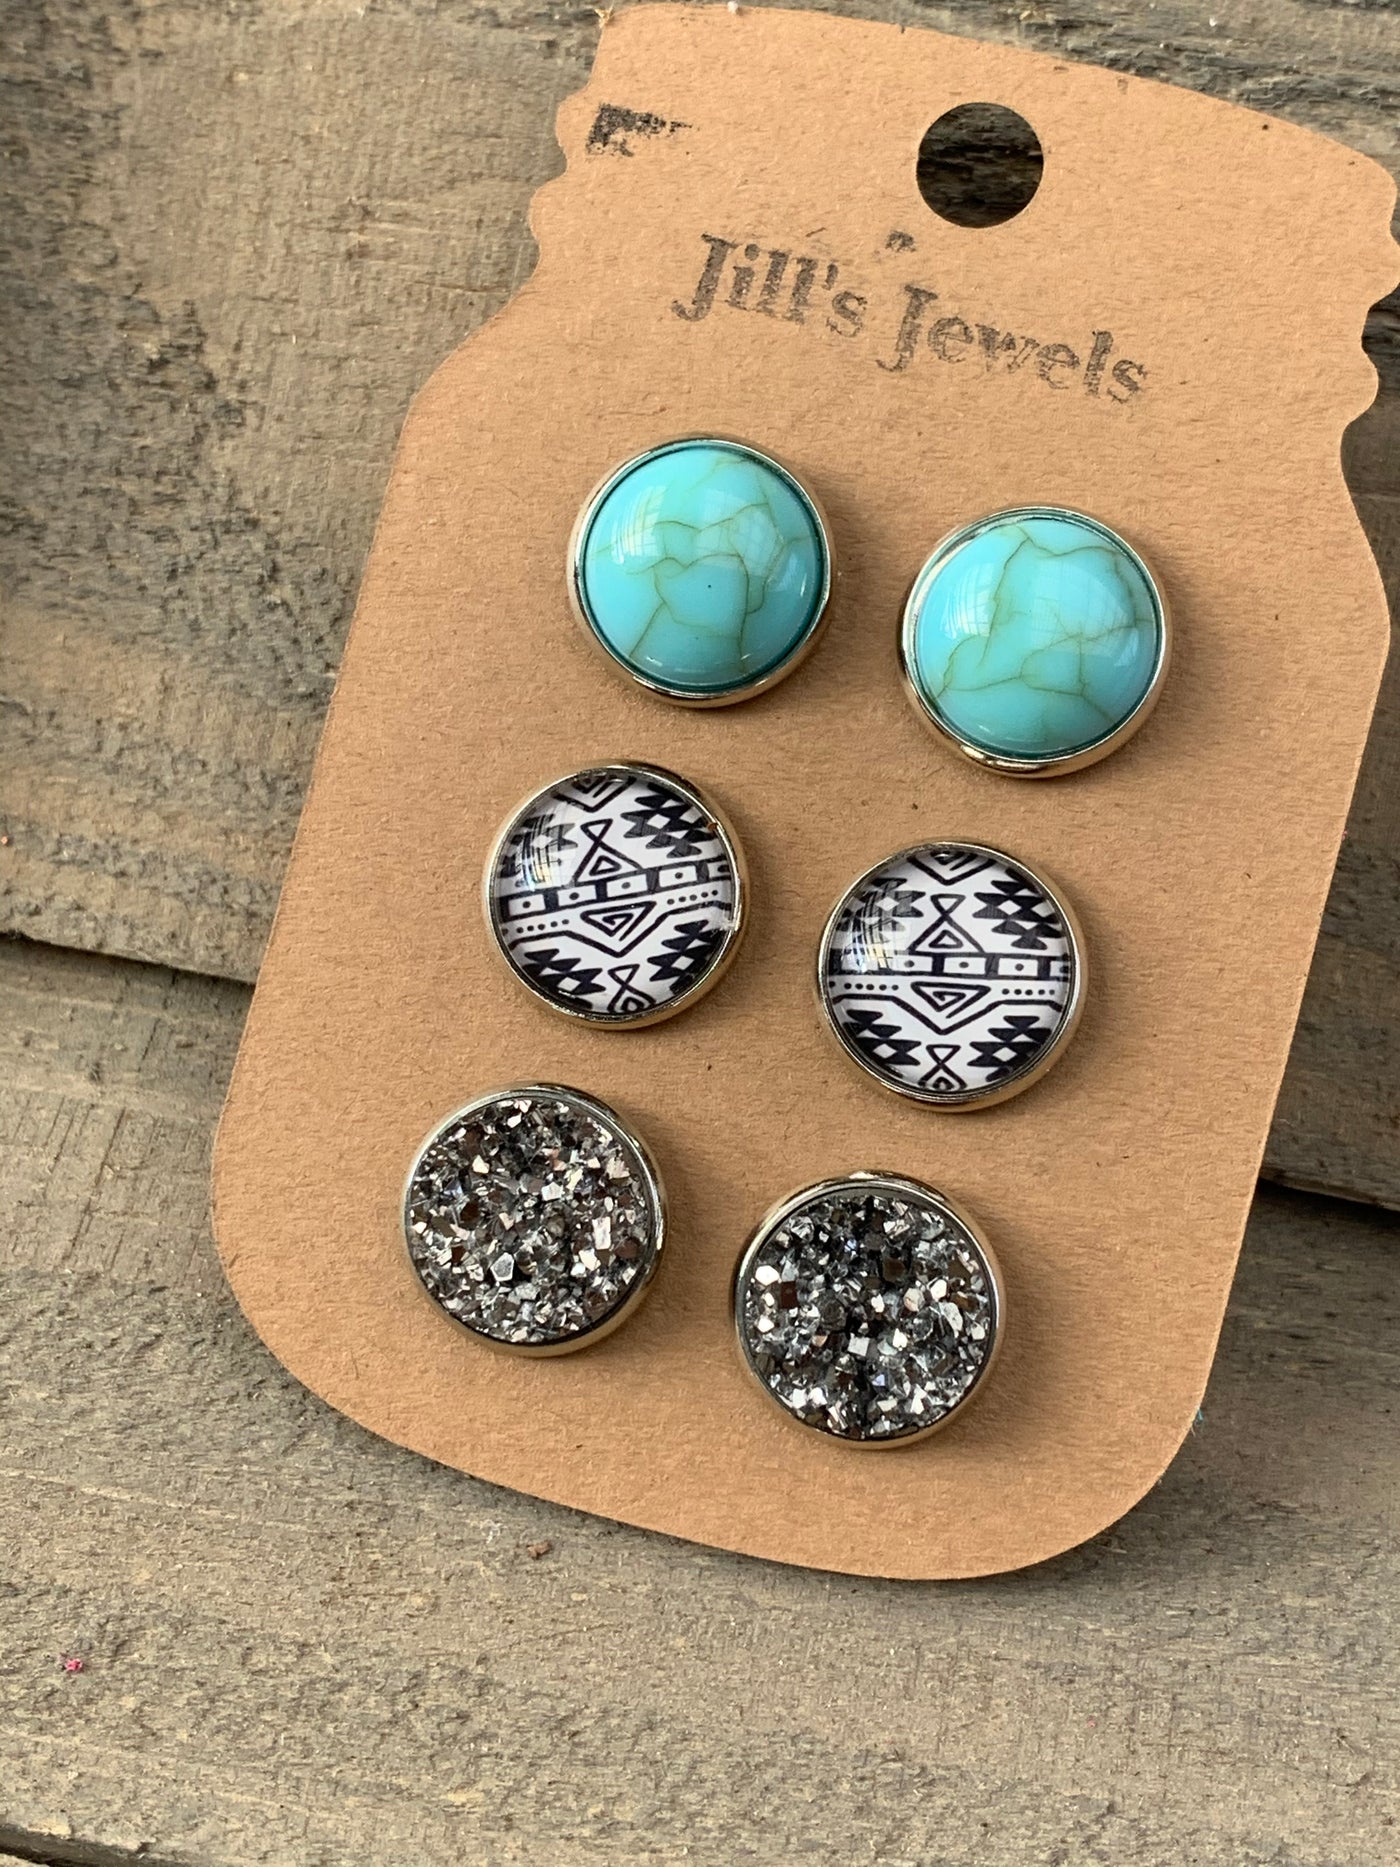 Black and White Aztec Turquoise Faux Druzy Earring 3 Set - Jill's Jewels | Unique, Handcrafted, Trendy, And Fun Jewelry